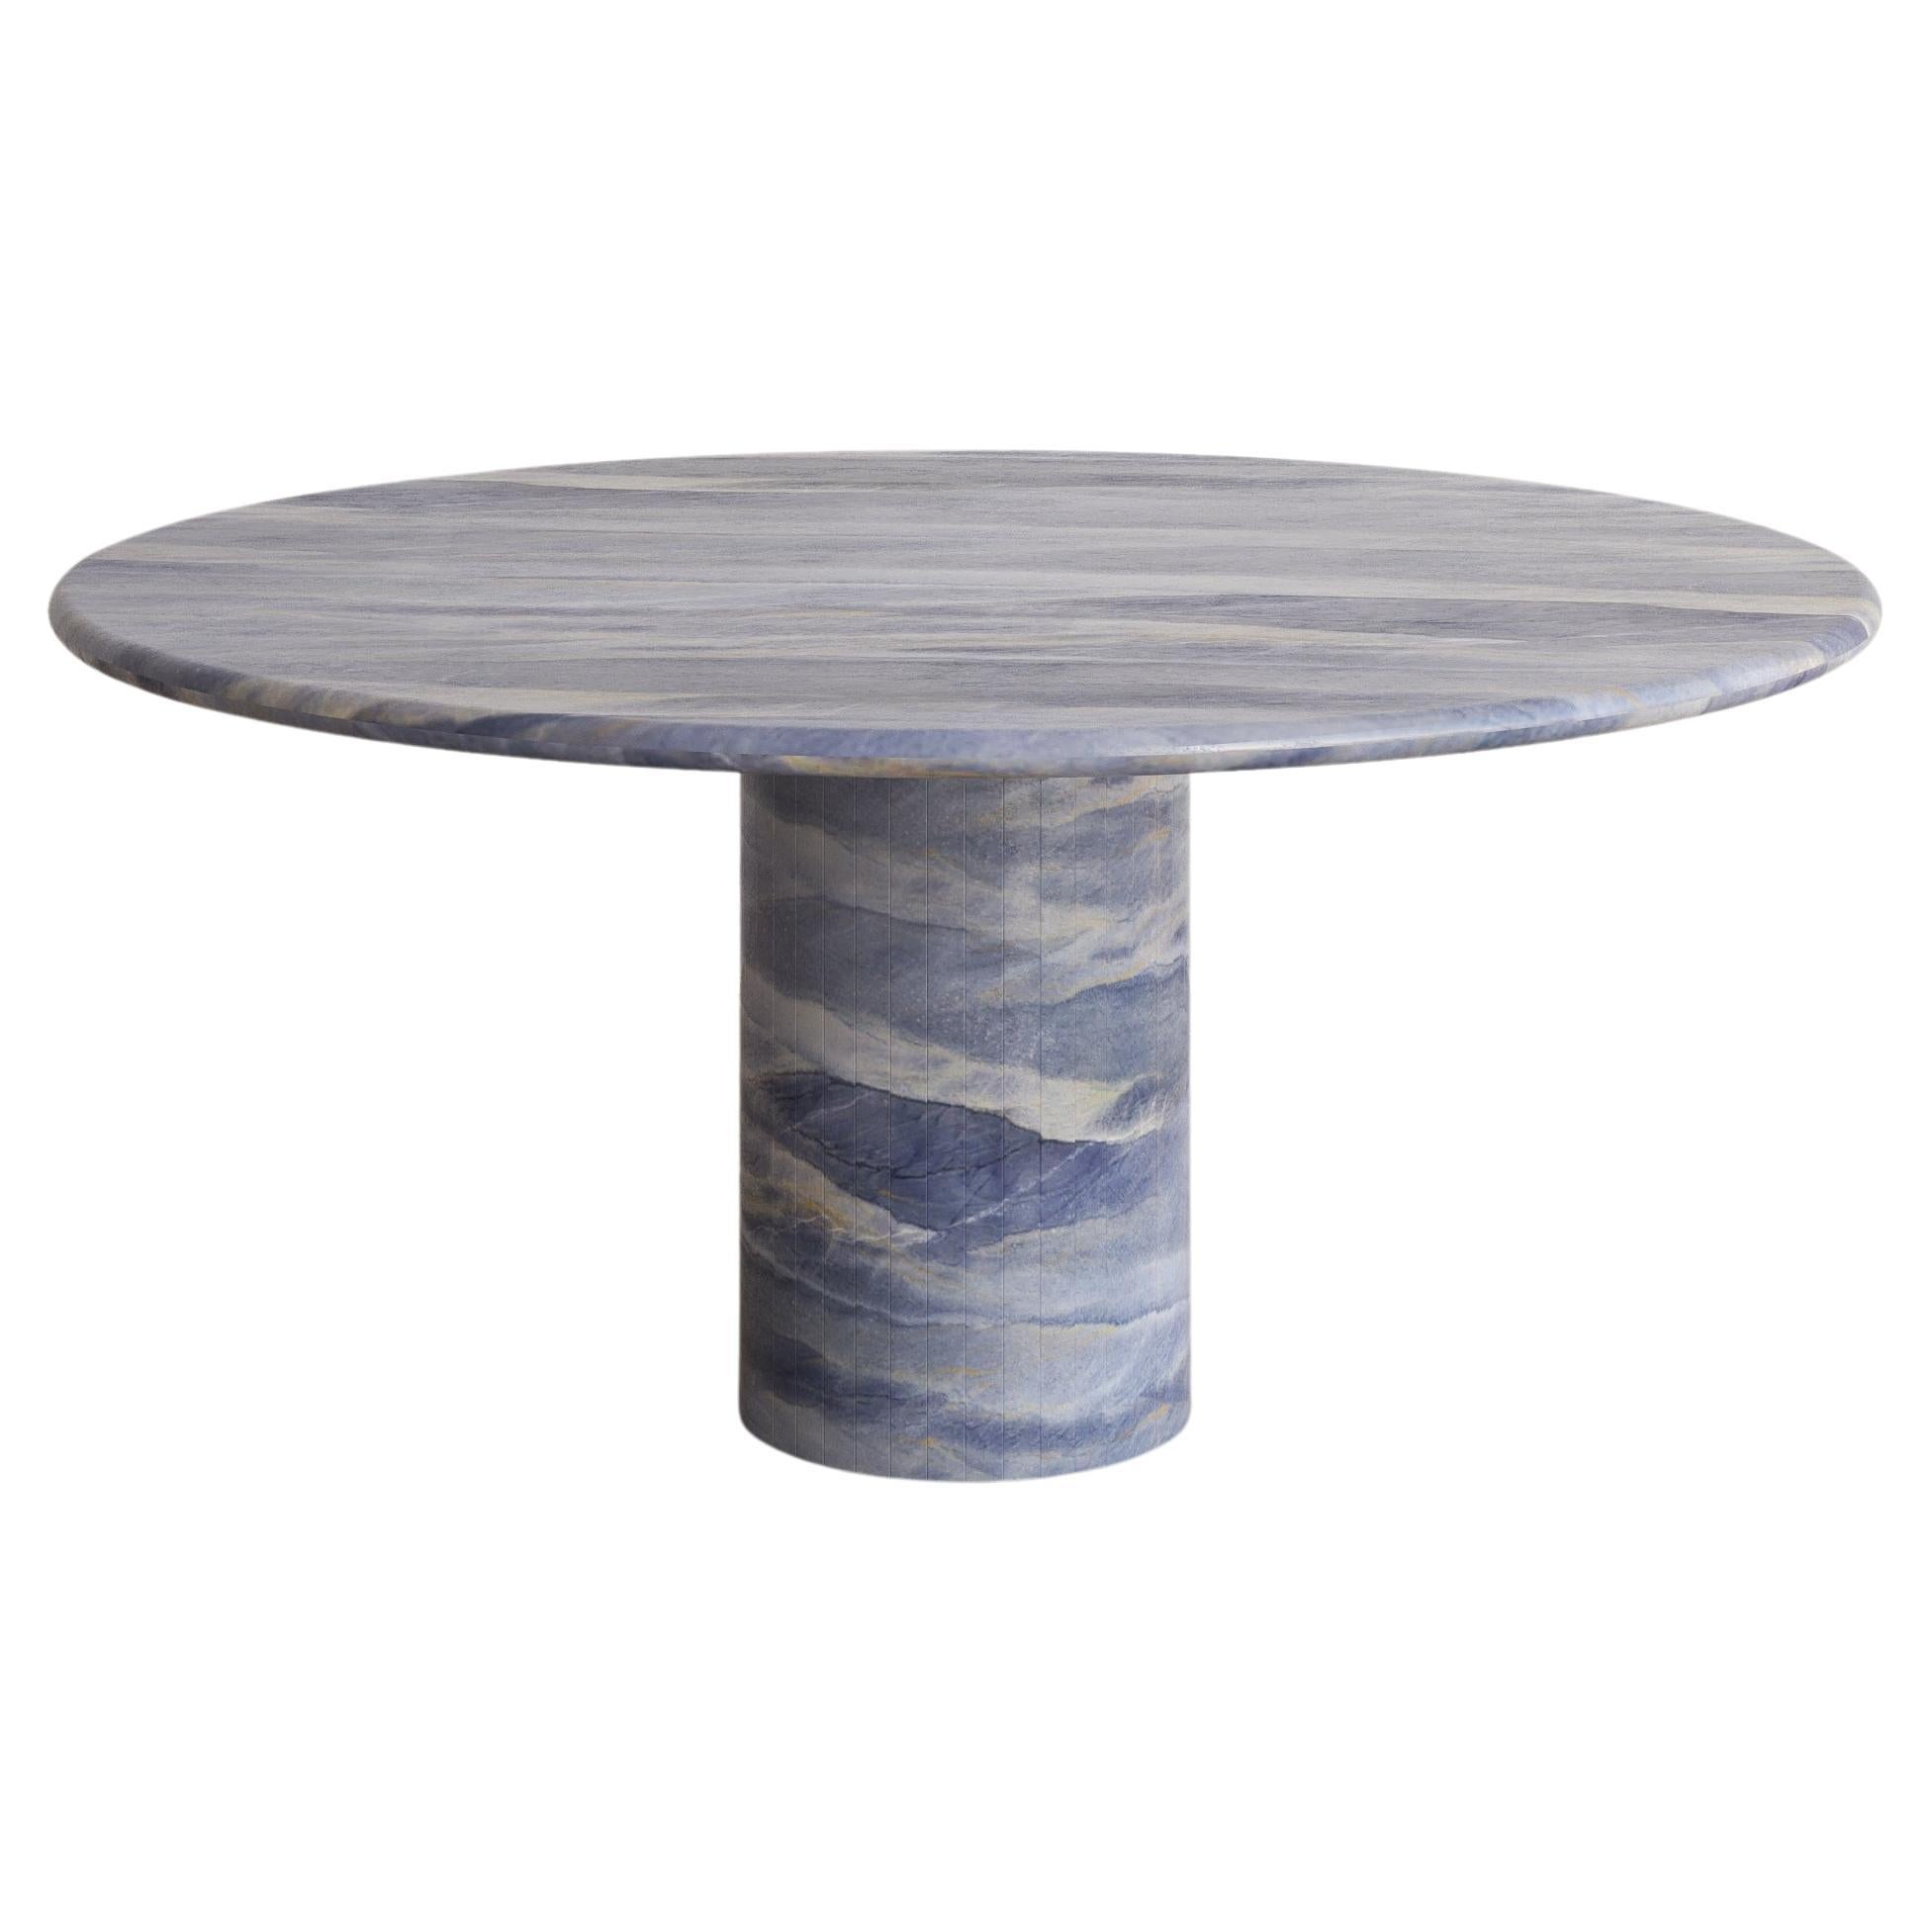 La Mer Quartzite Voyage Dining Table i by the Essentialist For Sale